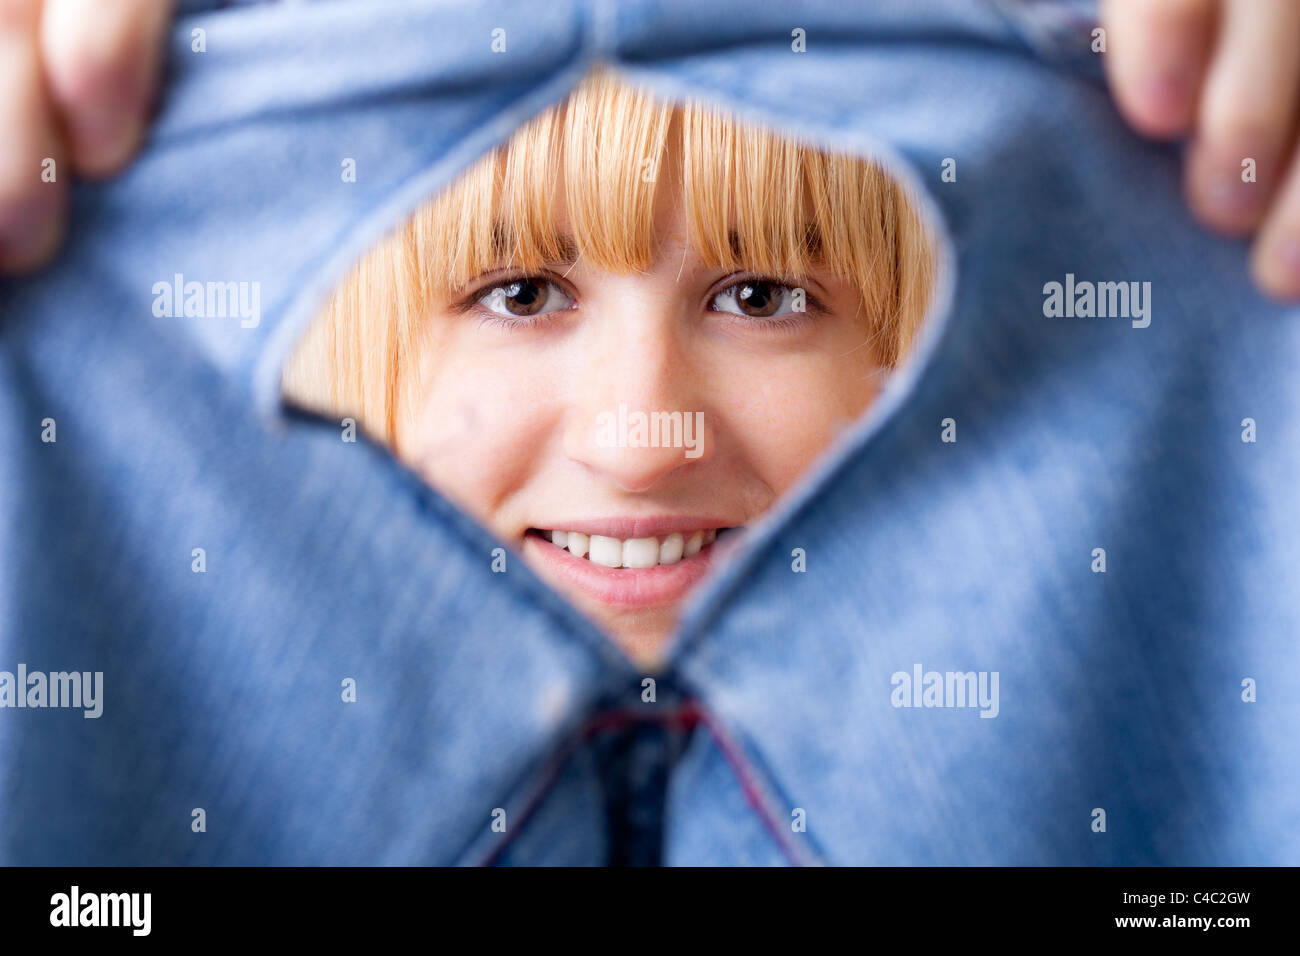 Smiling Woman with Torn Jeans Stock Photo